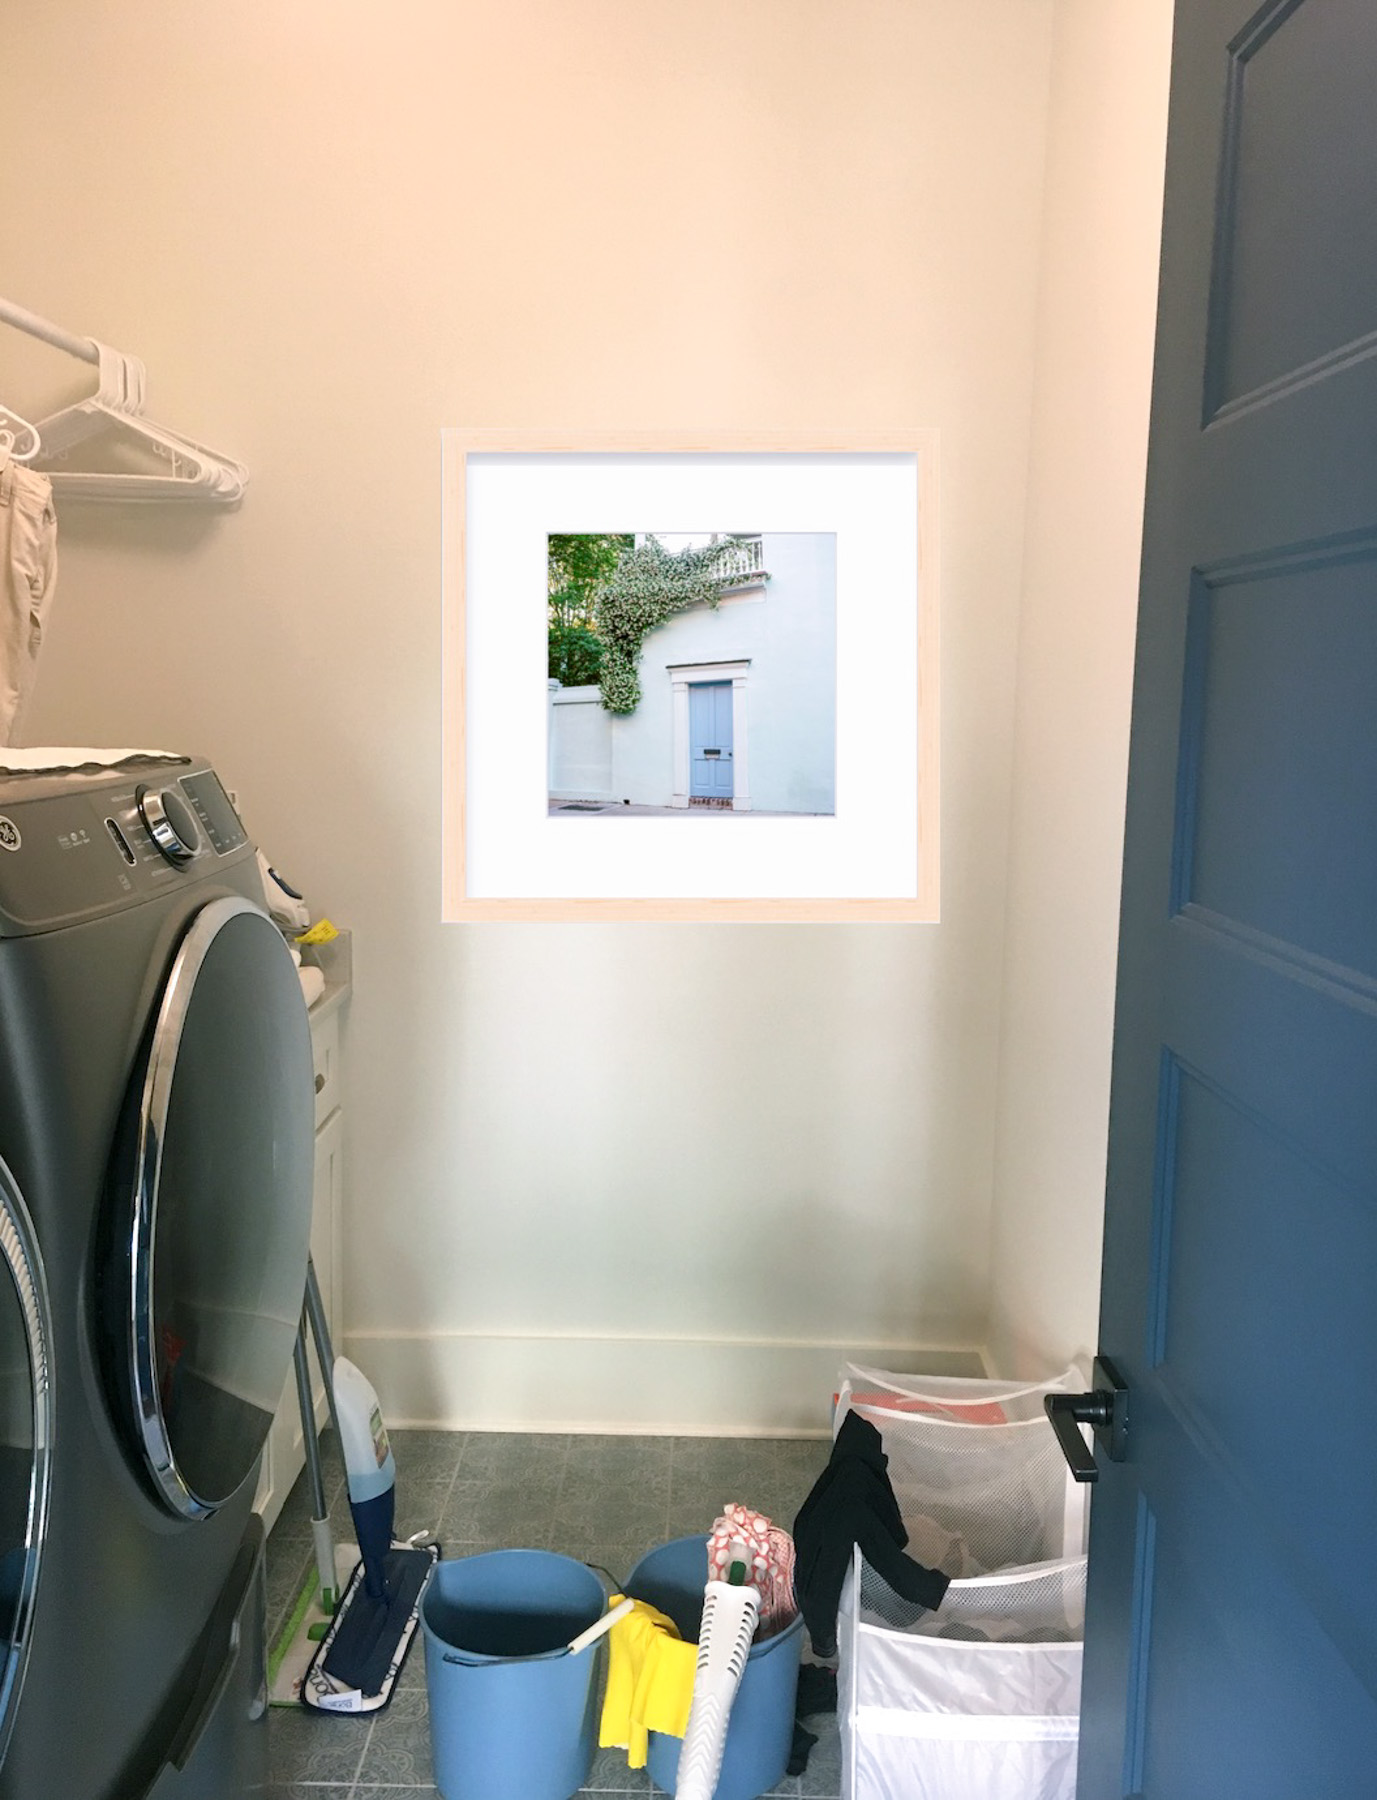 Before photo of a laundry room space with a Photoshopped photo in a frame. The photo was used as a preliminary design so the client could see what their space would look like with the frame on the wall. 